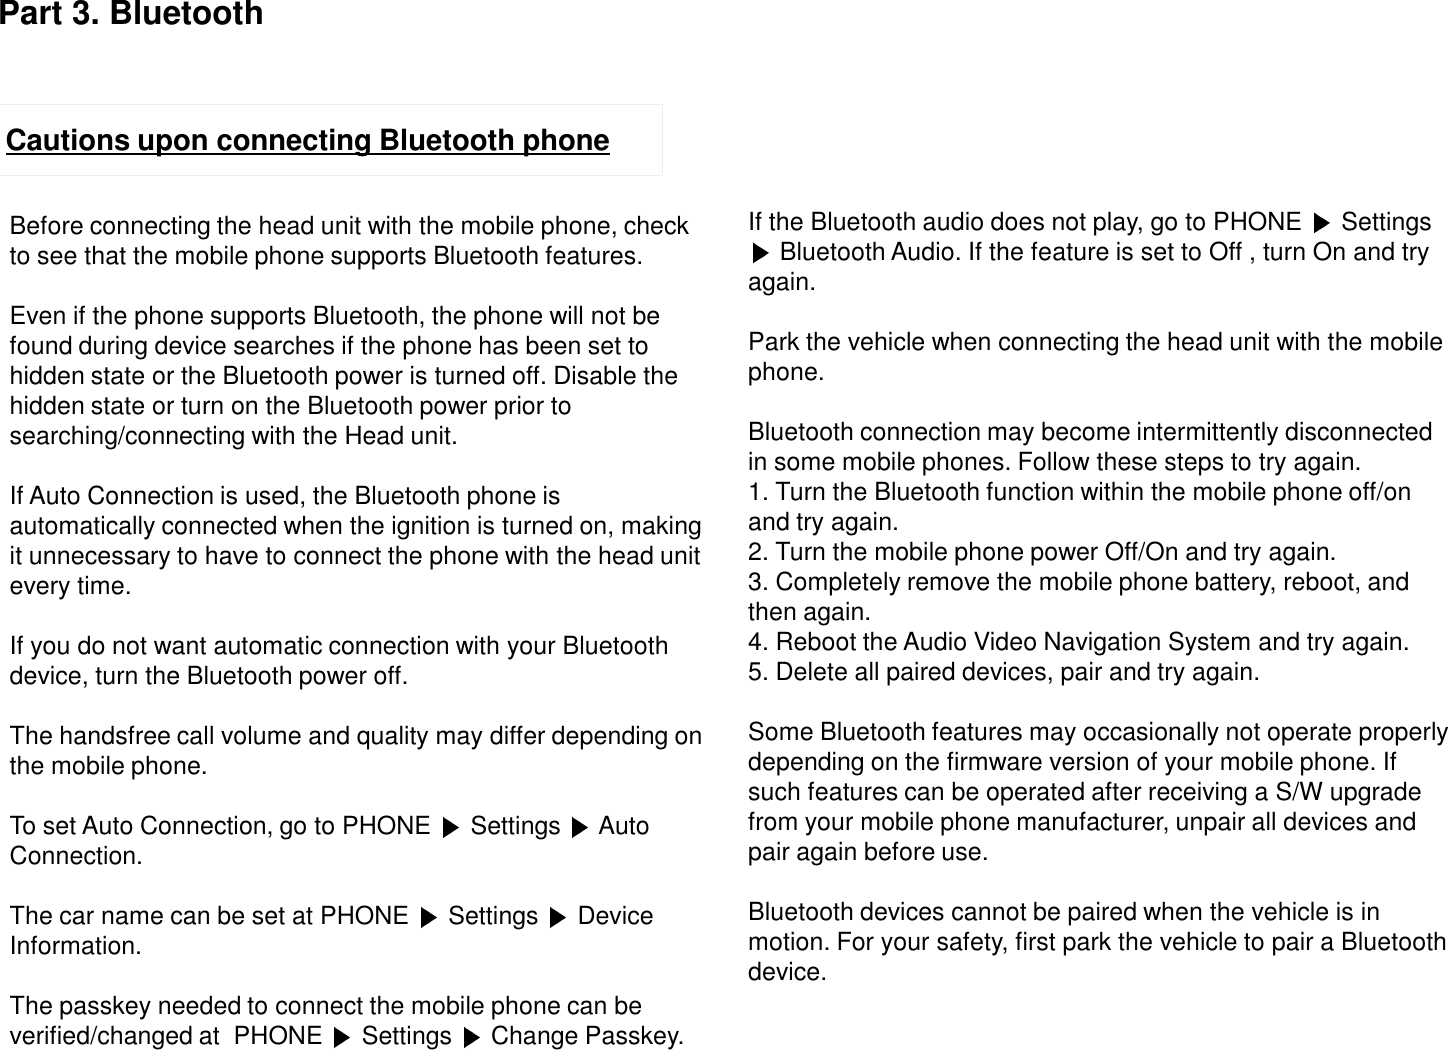 Cautions upon connecting Bluetooth phoneBefore connecting the head unit with the mobile phone, checkto see that the mobile phone supports Bluetooth features.Even if the phone supports Bluetooth, the phone will not befound during device searches if the phone has been set tohidden state or the Bluetooth power is turned off. Disable thehidden state or turn on the Bluetooth power prior to searching/connecting with the Head unit.If Auto Connection is used, the Bluetooth phone is automatically connected when the ignition is turned on, making it unnecessary to have to connect the phone with the head unit every time.If you do not want automatic connection with your Bluetooth device, turn the Bluetooth power off.The handsfree call volume and quality may differ depending onthe mobile phone.To set Auto Connection, go to PHONE  Settings  Auto Connection.The car name can be set at PHONE  Settings  Device Information.The passkey needed to connect the mobile phone can be verified/changed at  PHONE  Settings  Change Passkey.If the Bluetooth audio does not play, go to PHONE  Settings Bluetooth Audio. If the feature is set to Off , turn On and try again.Park the vehicle when connecting the head unit with the mobile phone.Bluetooth connection may become intermittently disconnected in some mobile phones. Follow these steps to try again.1. Turn the Bluetooth function within the mobile phone off/on and try again.2. Turn the mobile phone power Off/On and try again.3. Completely remove the mobile phone battery, reboot, and then again.4. Reboot the Audio Video Navigation System and try again.5. Delete all paired devices, pair and try again.Some Bluetooth features may occasionally not operate properly depending on the firmware version of your mobile phone. If such features can be operated after receiving a S/W upgrade from your mobile phone manufacturer, unpair all devices and pair again before use.Bluetooth devices cannot be paired when the vehicle is in motion. For your safety, first park the vehicle to pair a Bluetooth device.Part 3. Bluetooth